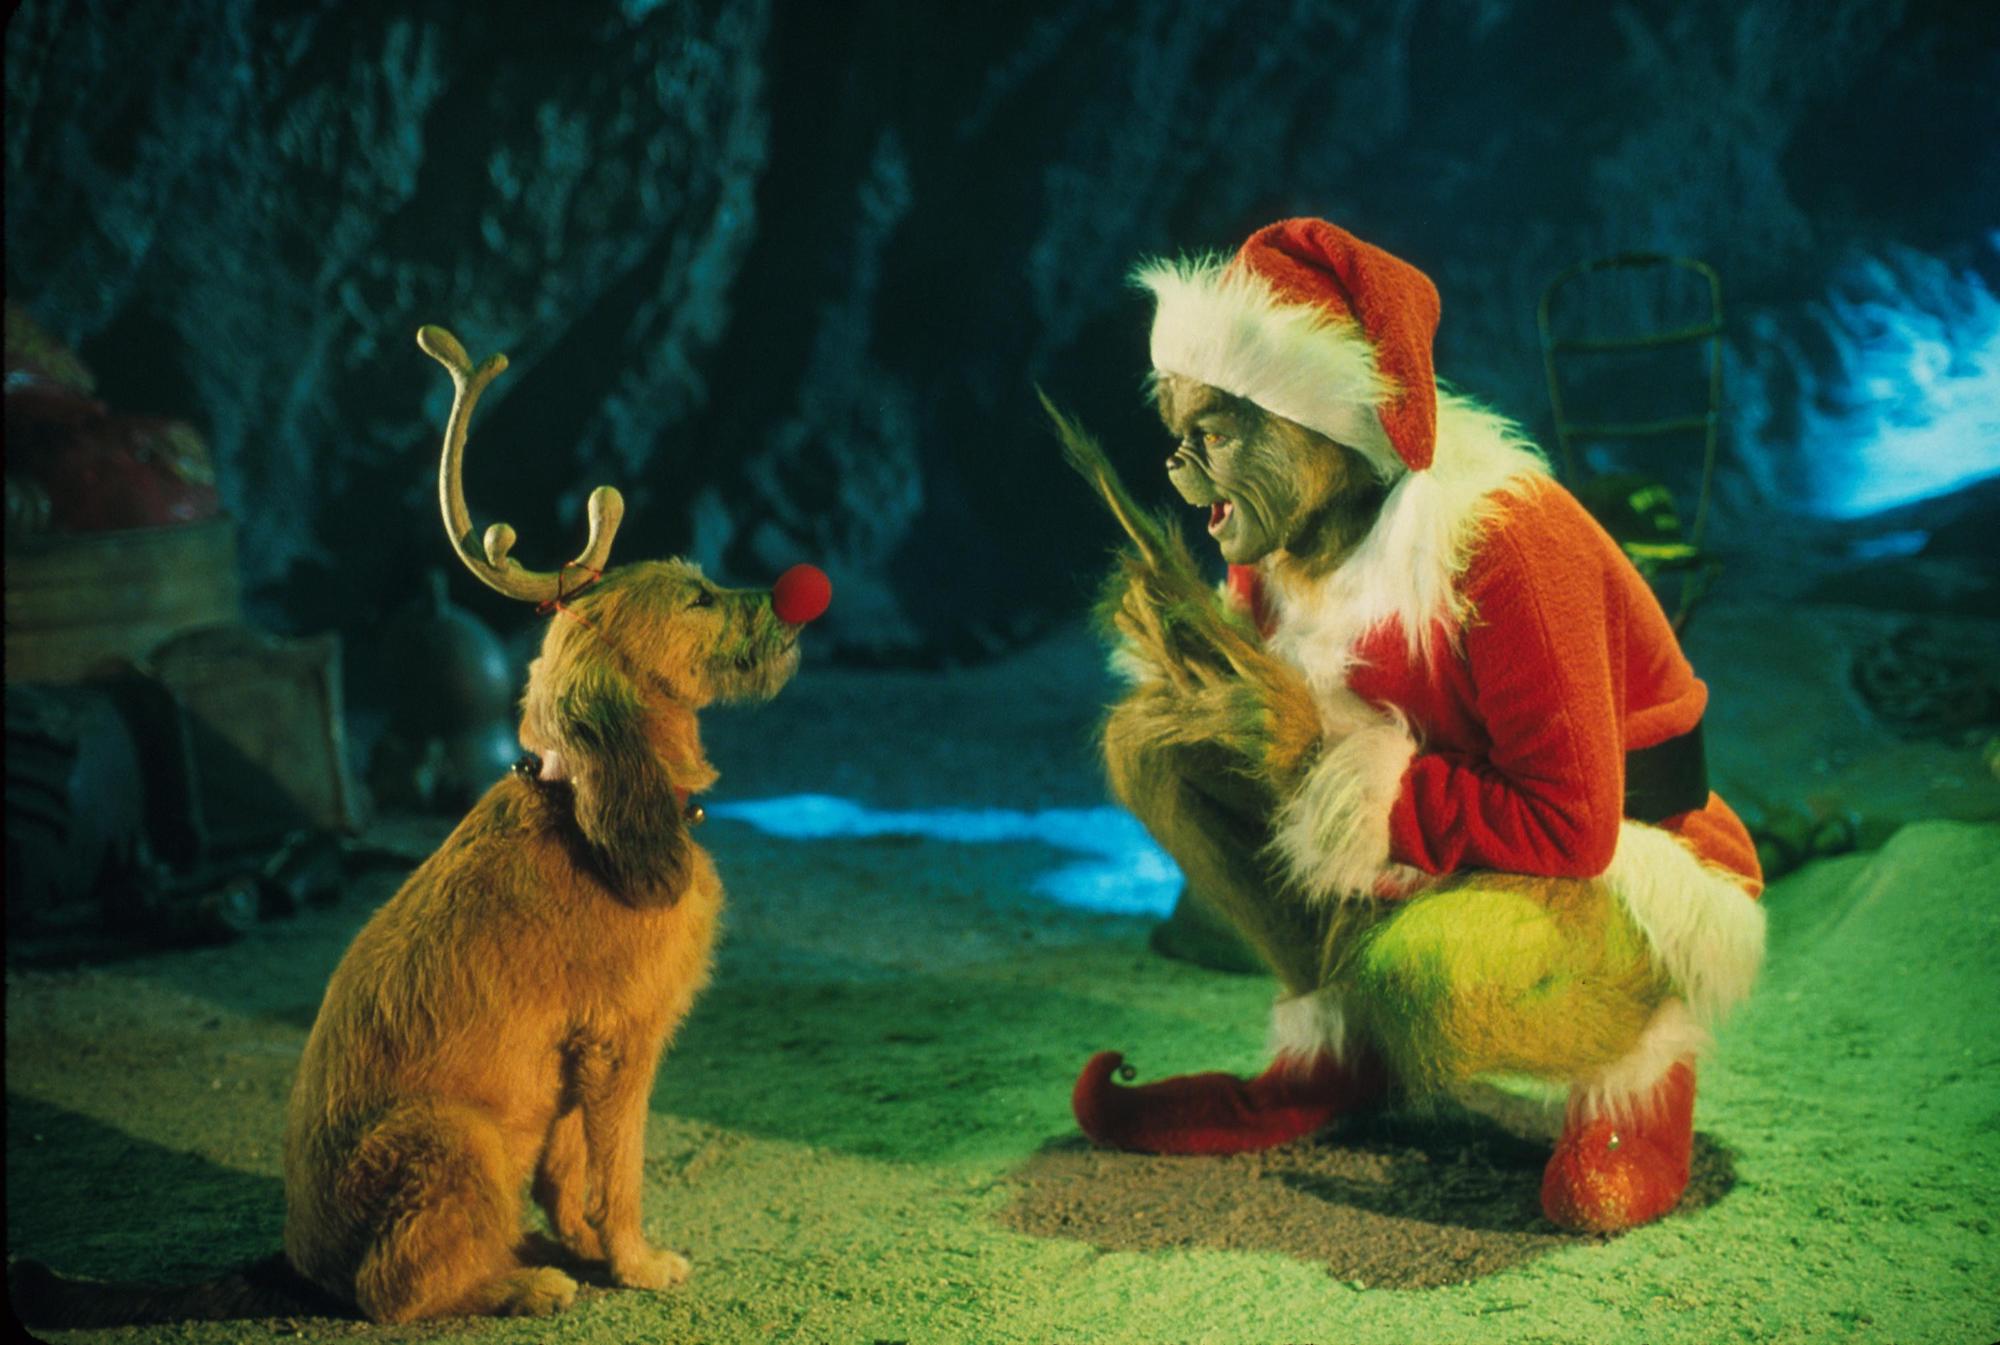 The Grinch, Played By Jim Carrey, Conspires With His Dog Max To Deprive The Whos Of Their Favorite Holiday In 'Dr. Seuss' How The Grinch Stole Christmas," Directed By Ron Howard 